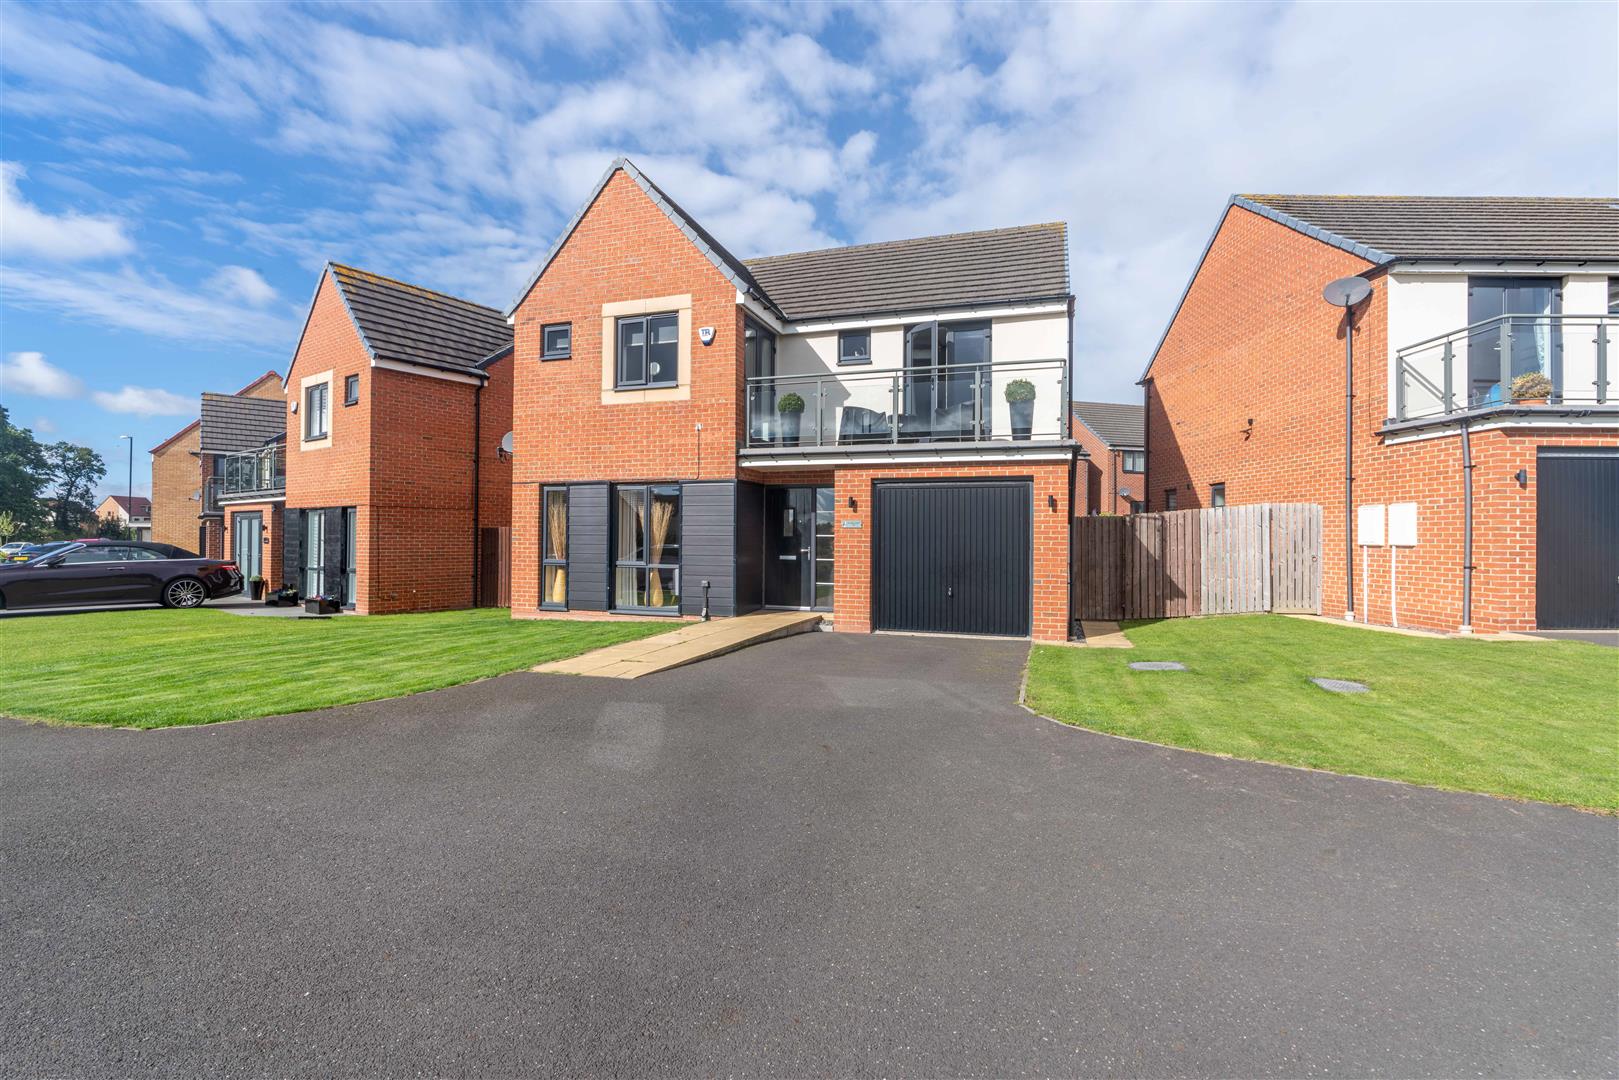 4 bed detached house for sale in Sir Bobby Robson Way, Great Park, NE13